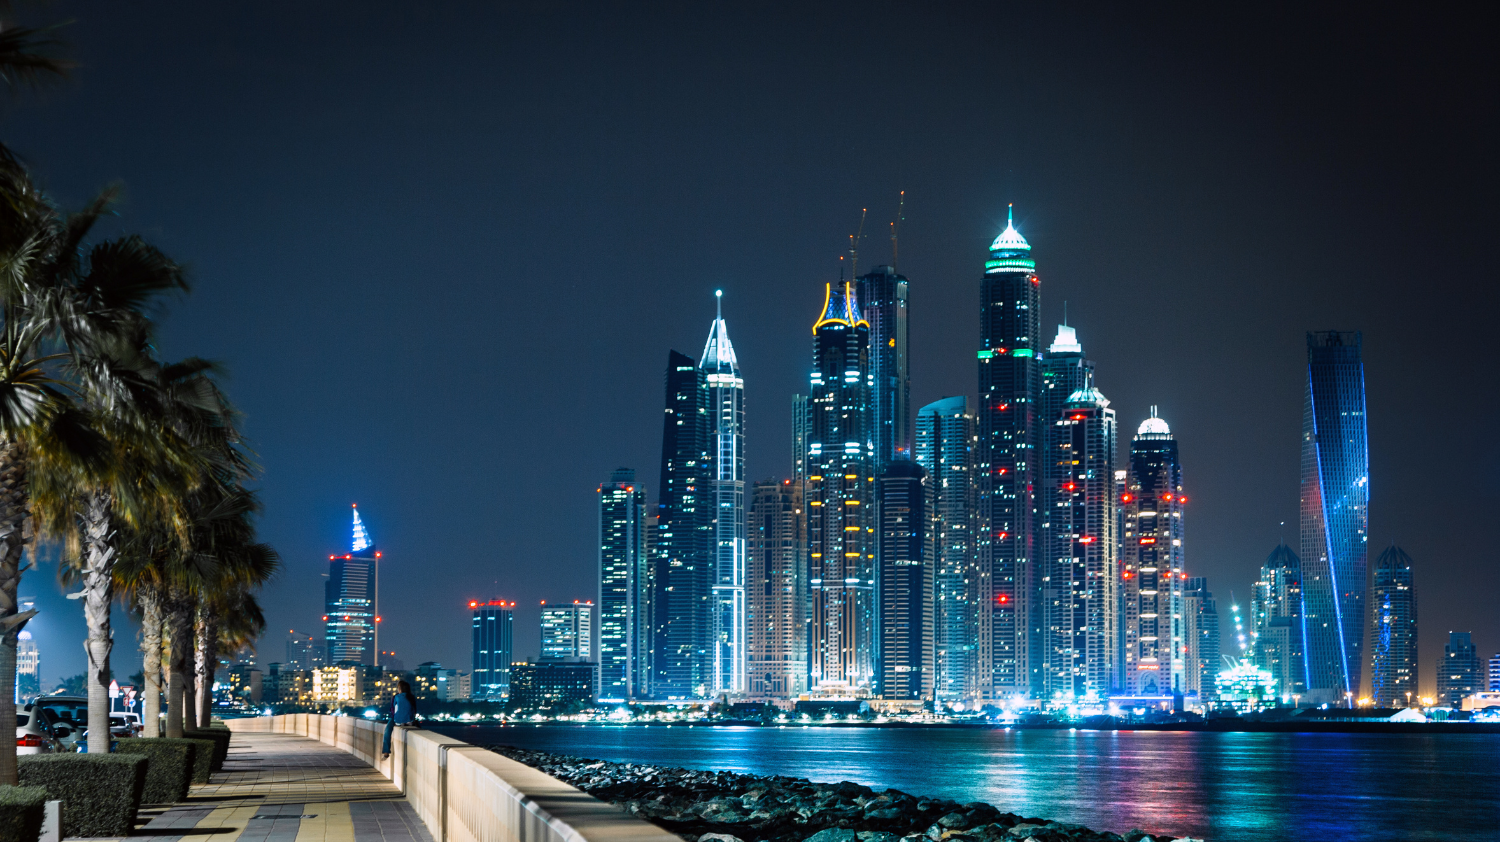 A tourism license is required for the establishment of a hotel business in Dubai. A tourism license can range between AED 35000 and AED 45000, including service and local agent fees.